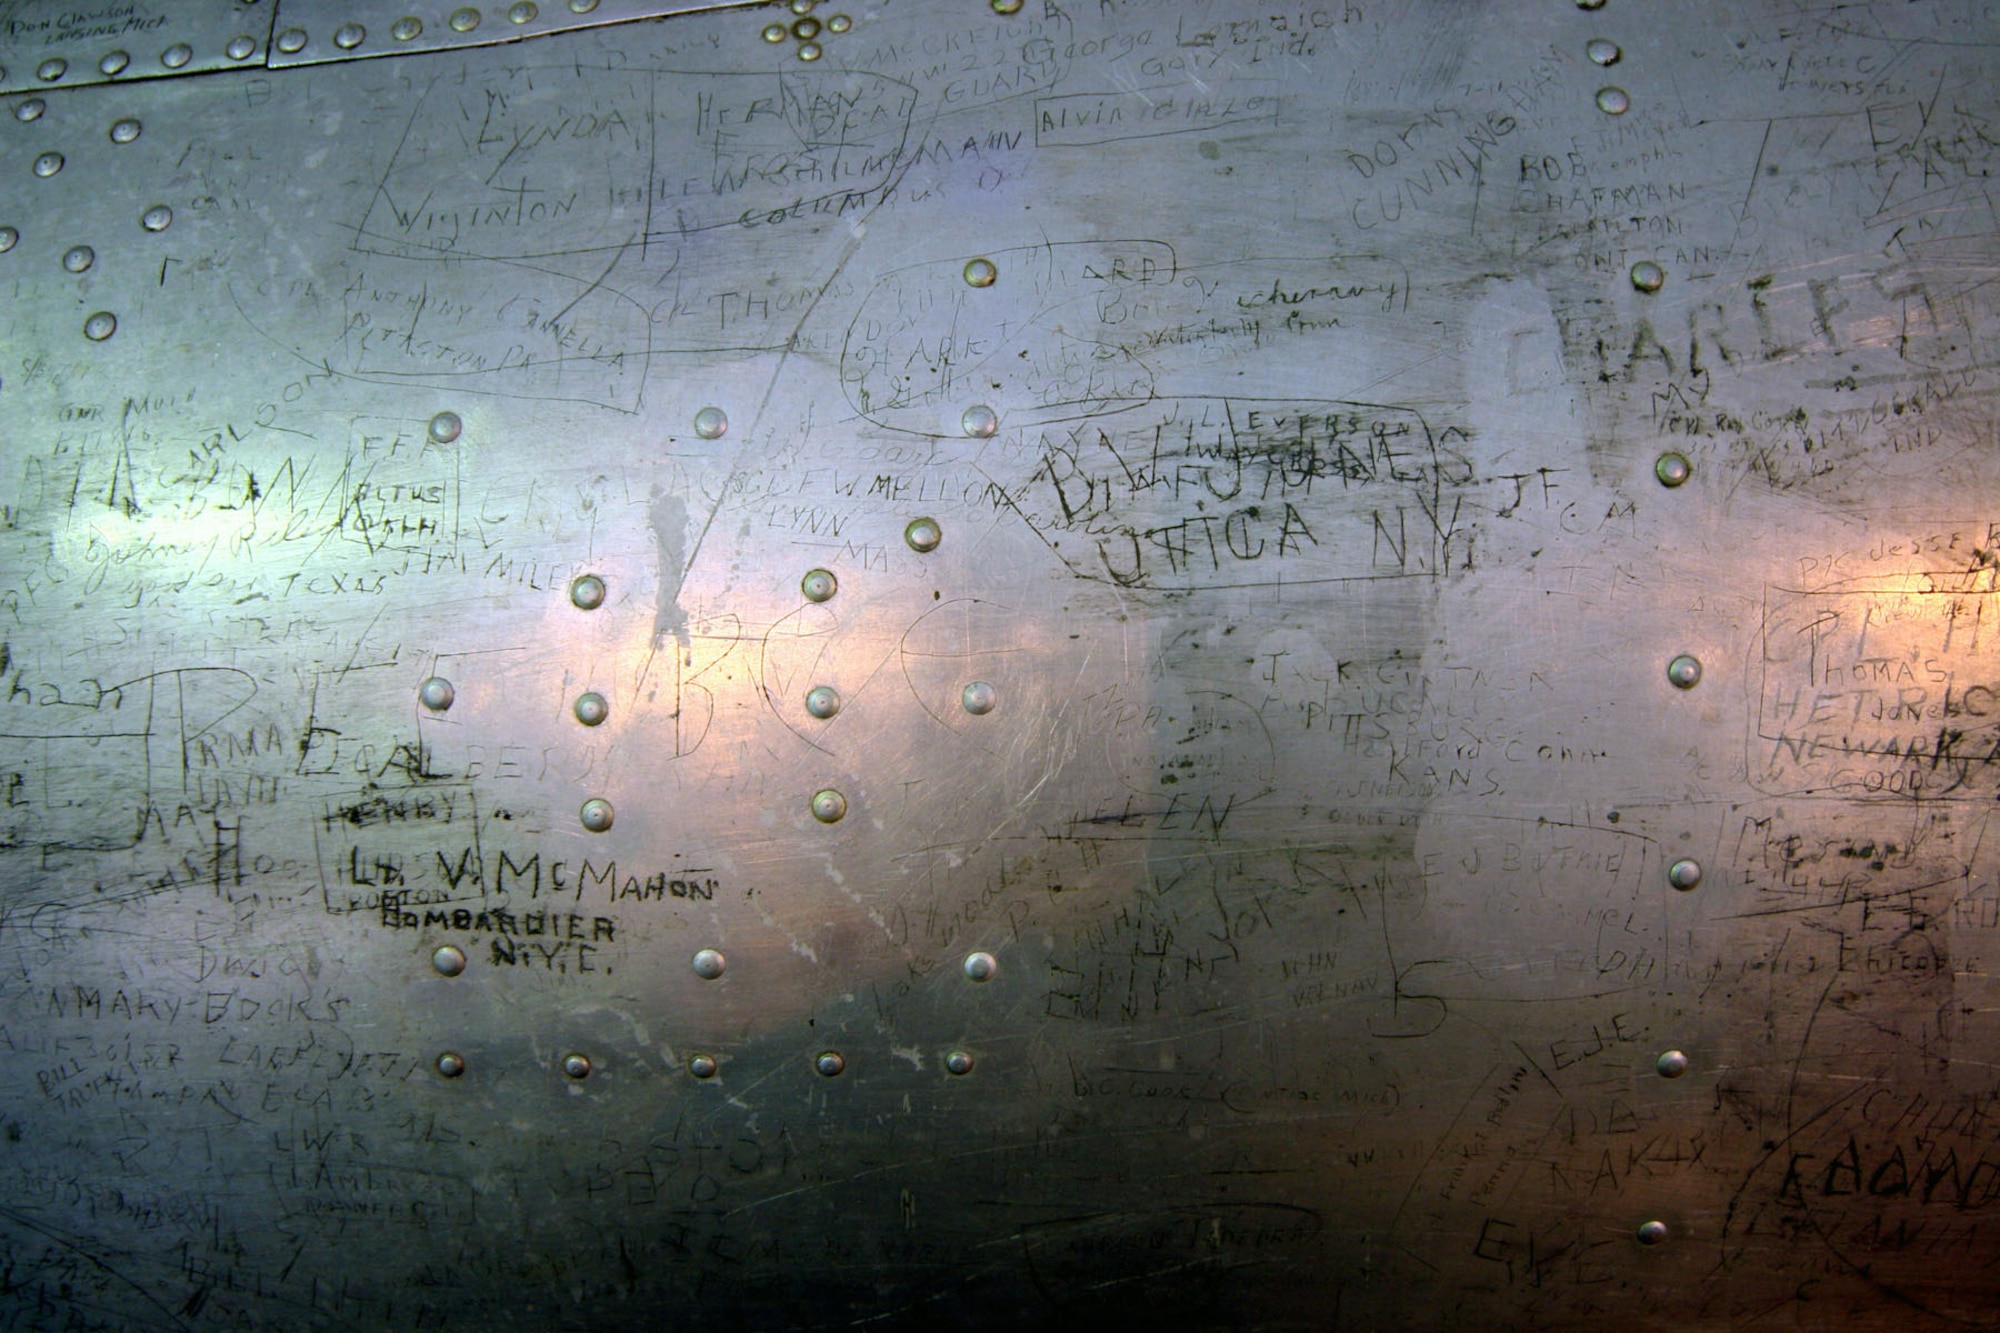 DAYTON, Ohio (07/2007) -- The B-17F "Memphis Belle" in restoration at the National Museum of the U.S. Air Force. This photo shows some of the graffiti on the aircraft. (Photo courtesy of Craig Scaling, Airshow Traveler)